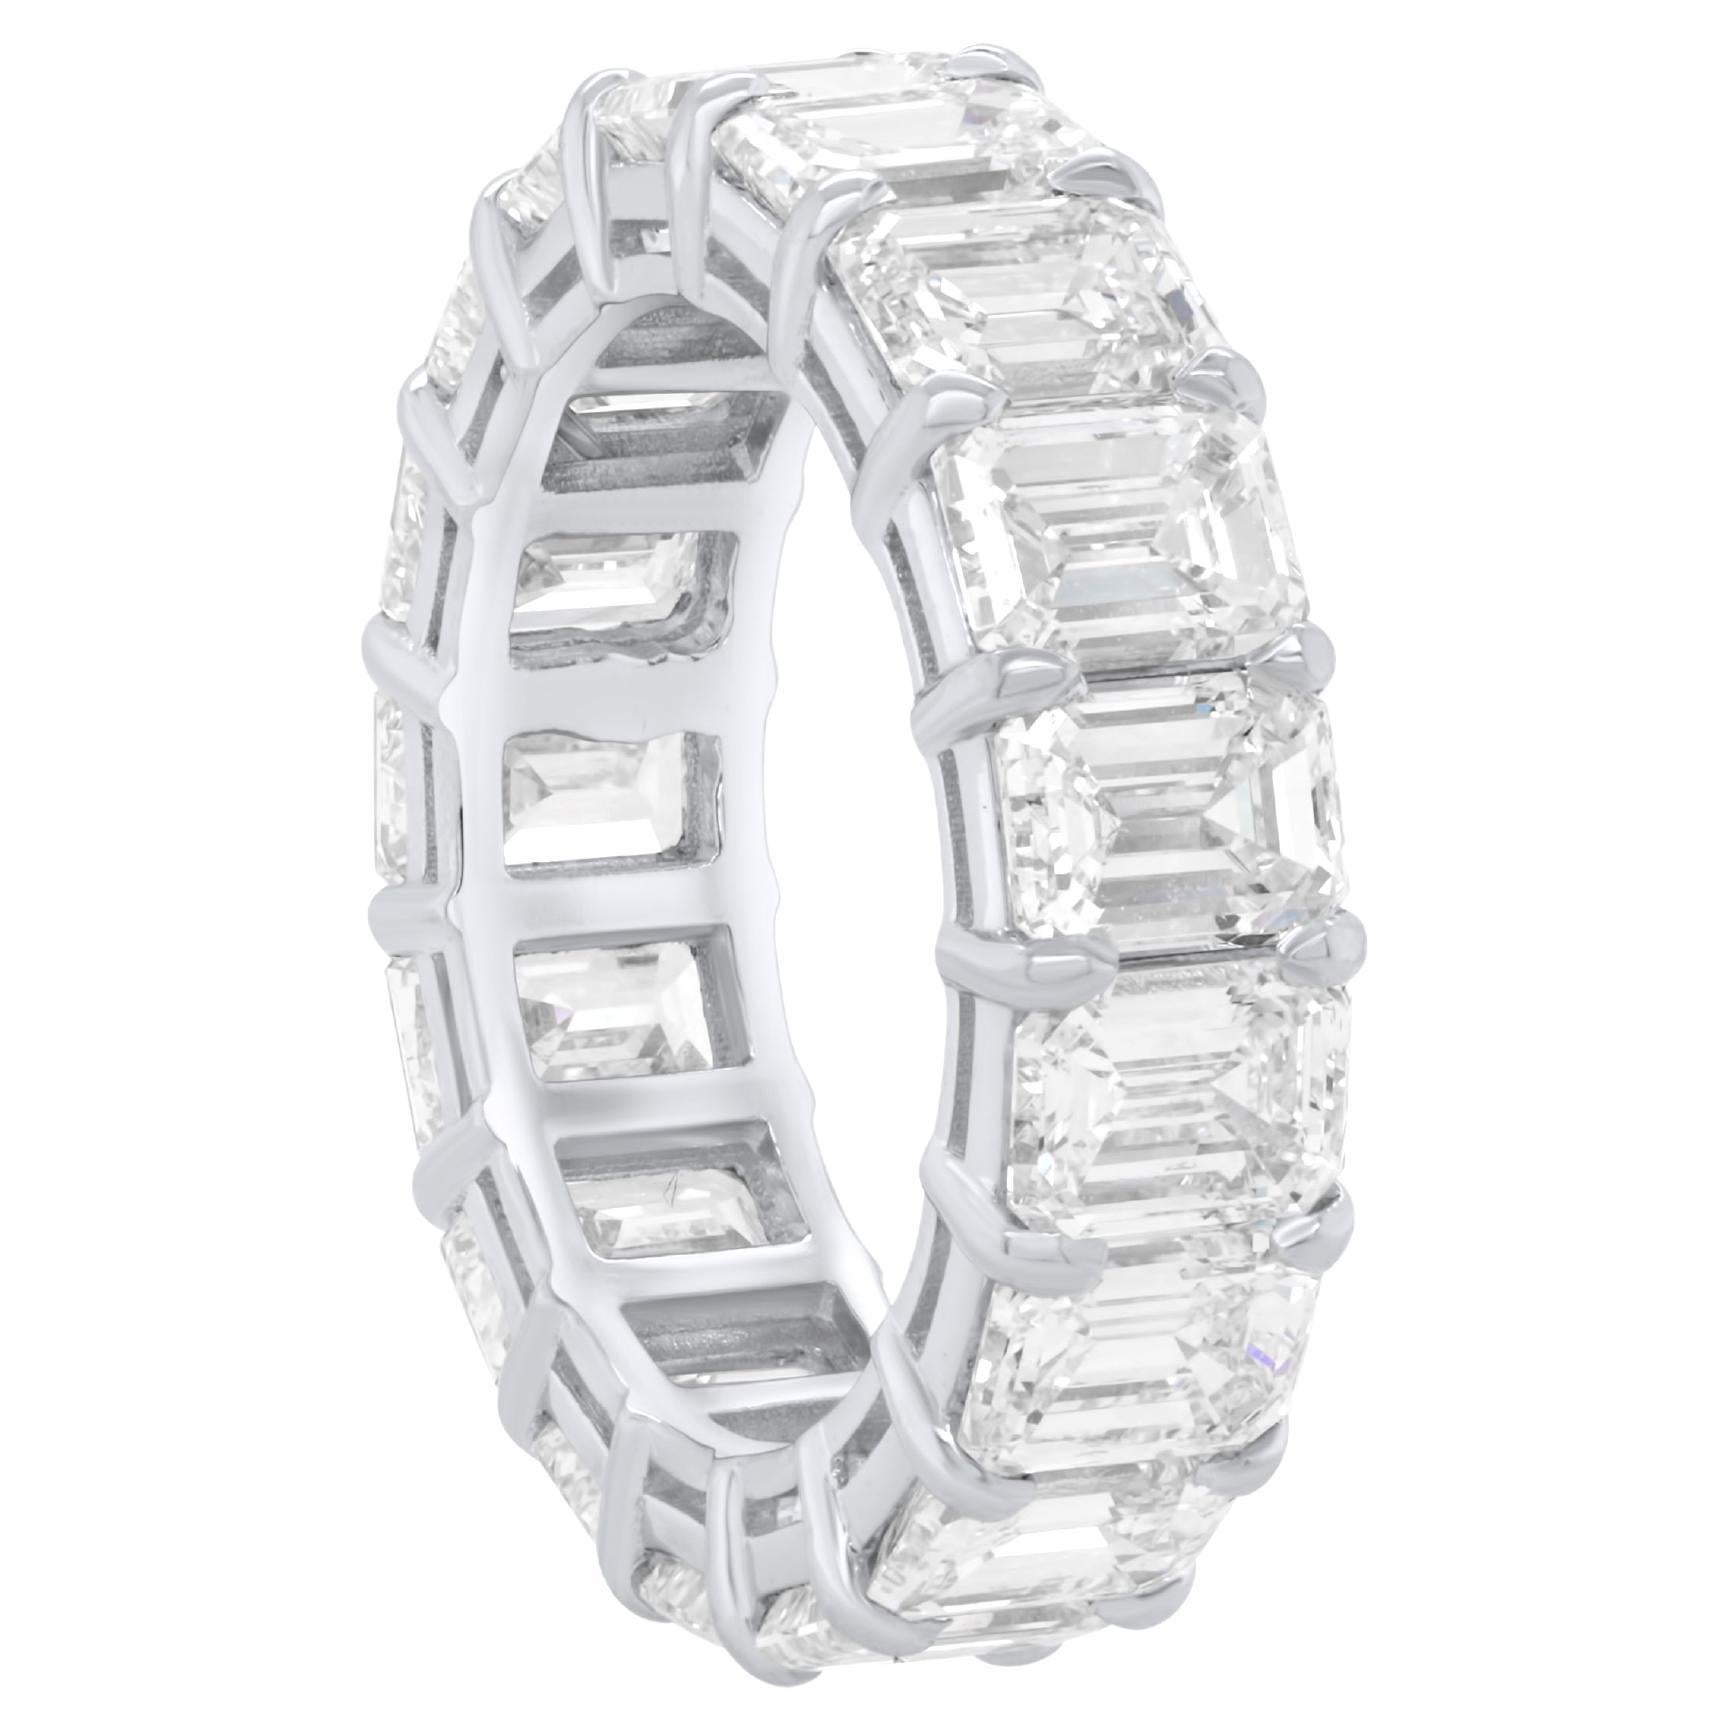 Diana M. PLATINUM ETERNITY BAND WITH 18 EMERALD CUT DIAMONDS  RING, WIEGHING  For Sale